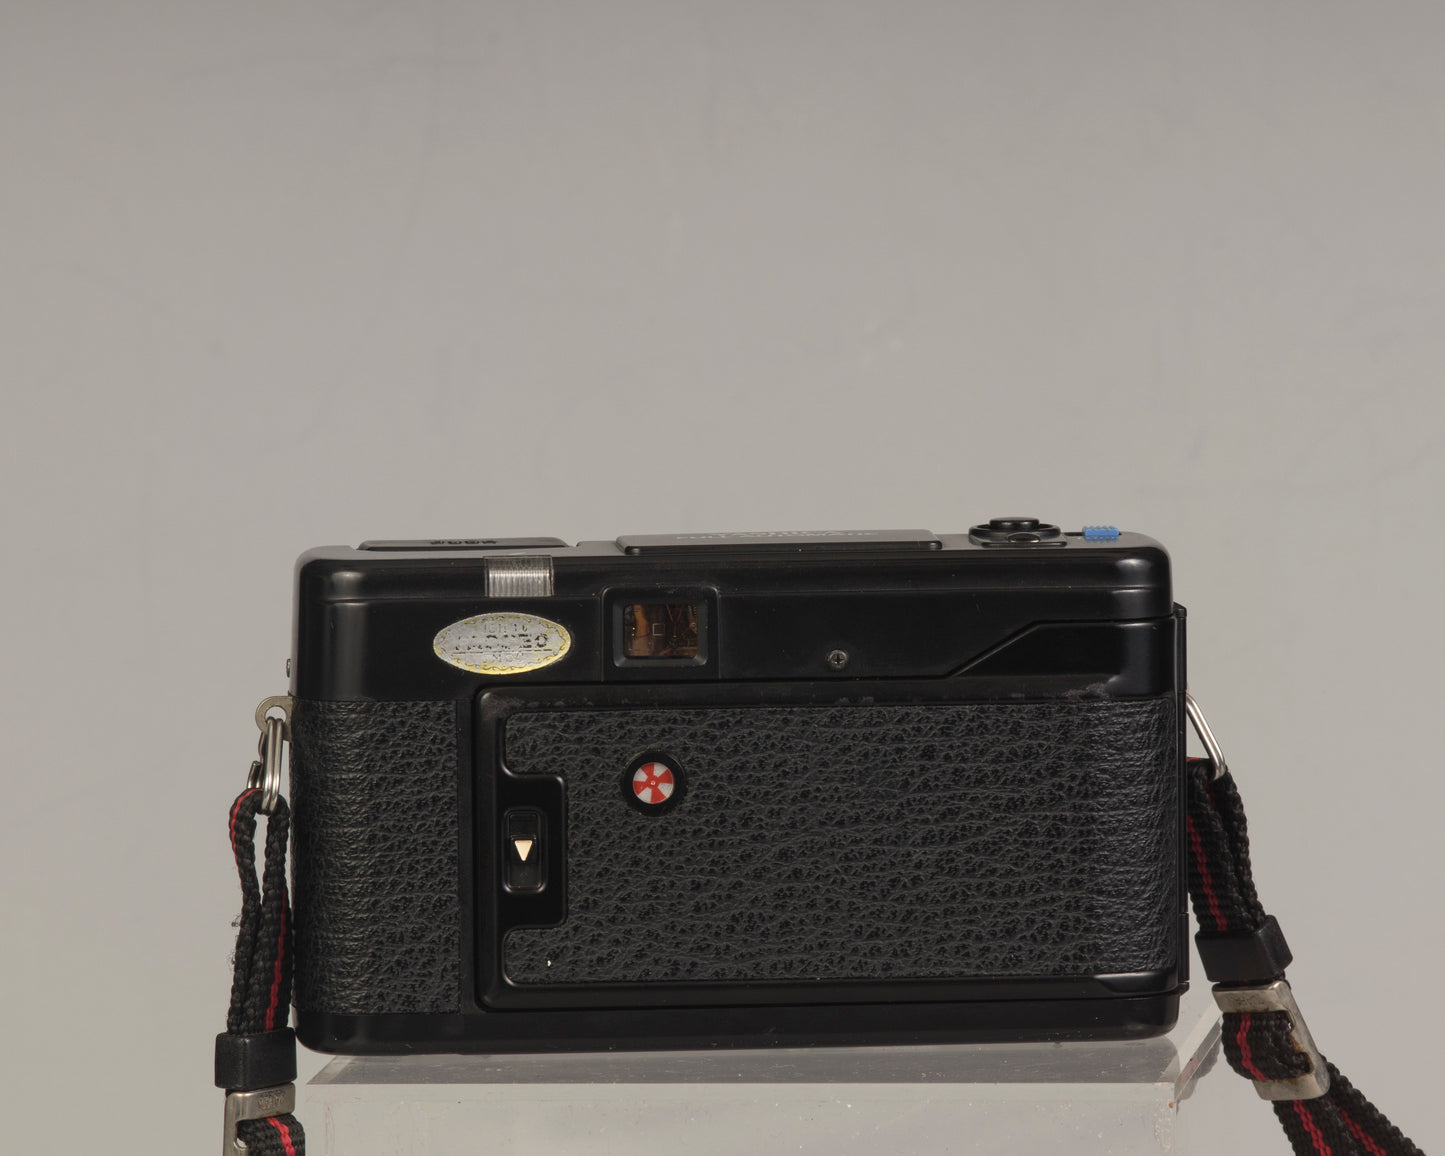 The Yashica Auto Focus Motor (back view shown) is a classic 35mm point-and-shoot film camera featuring a 38mm f2.8 lens